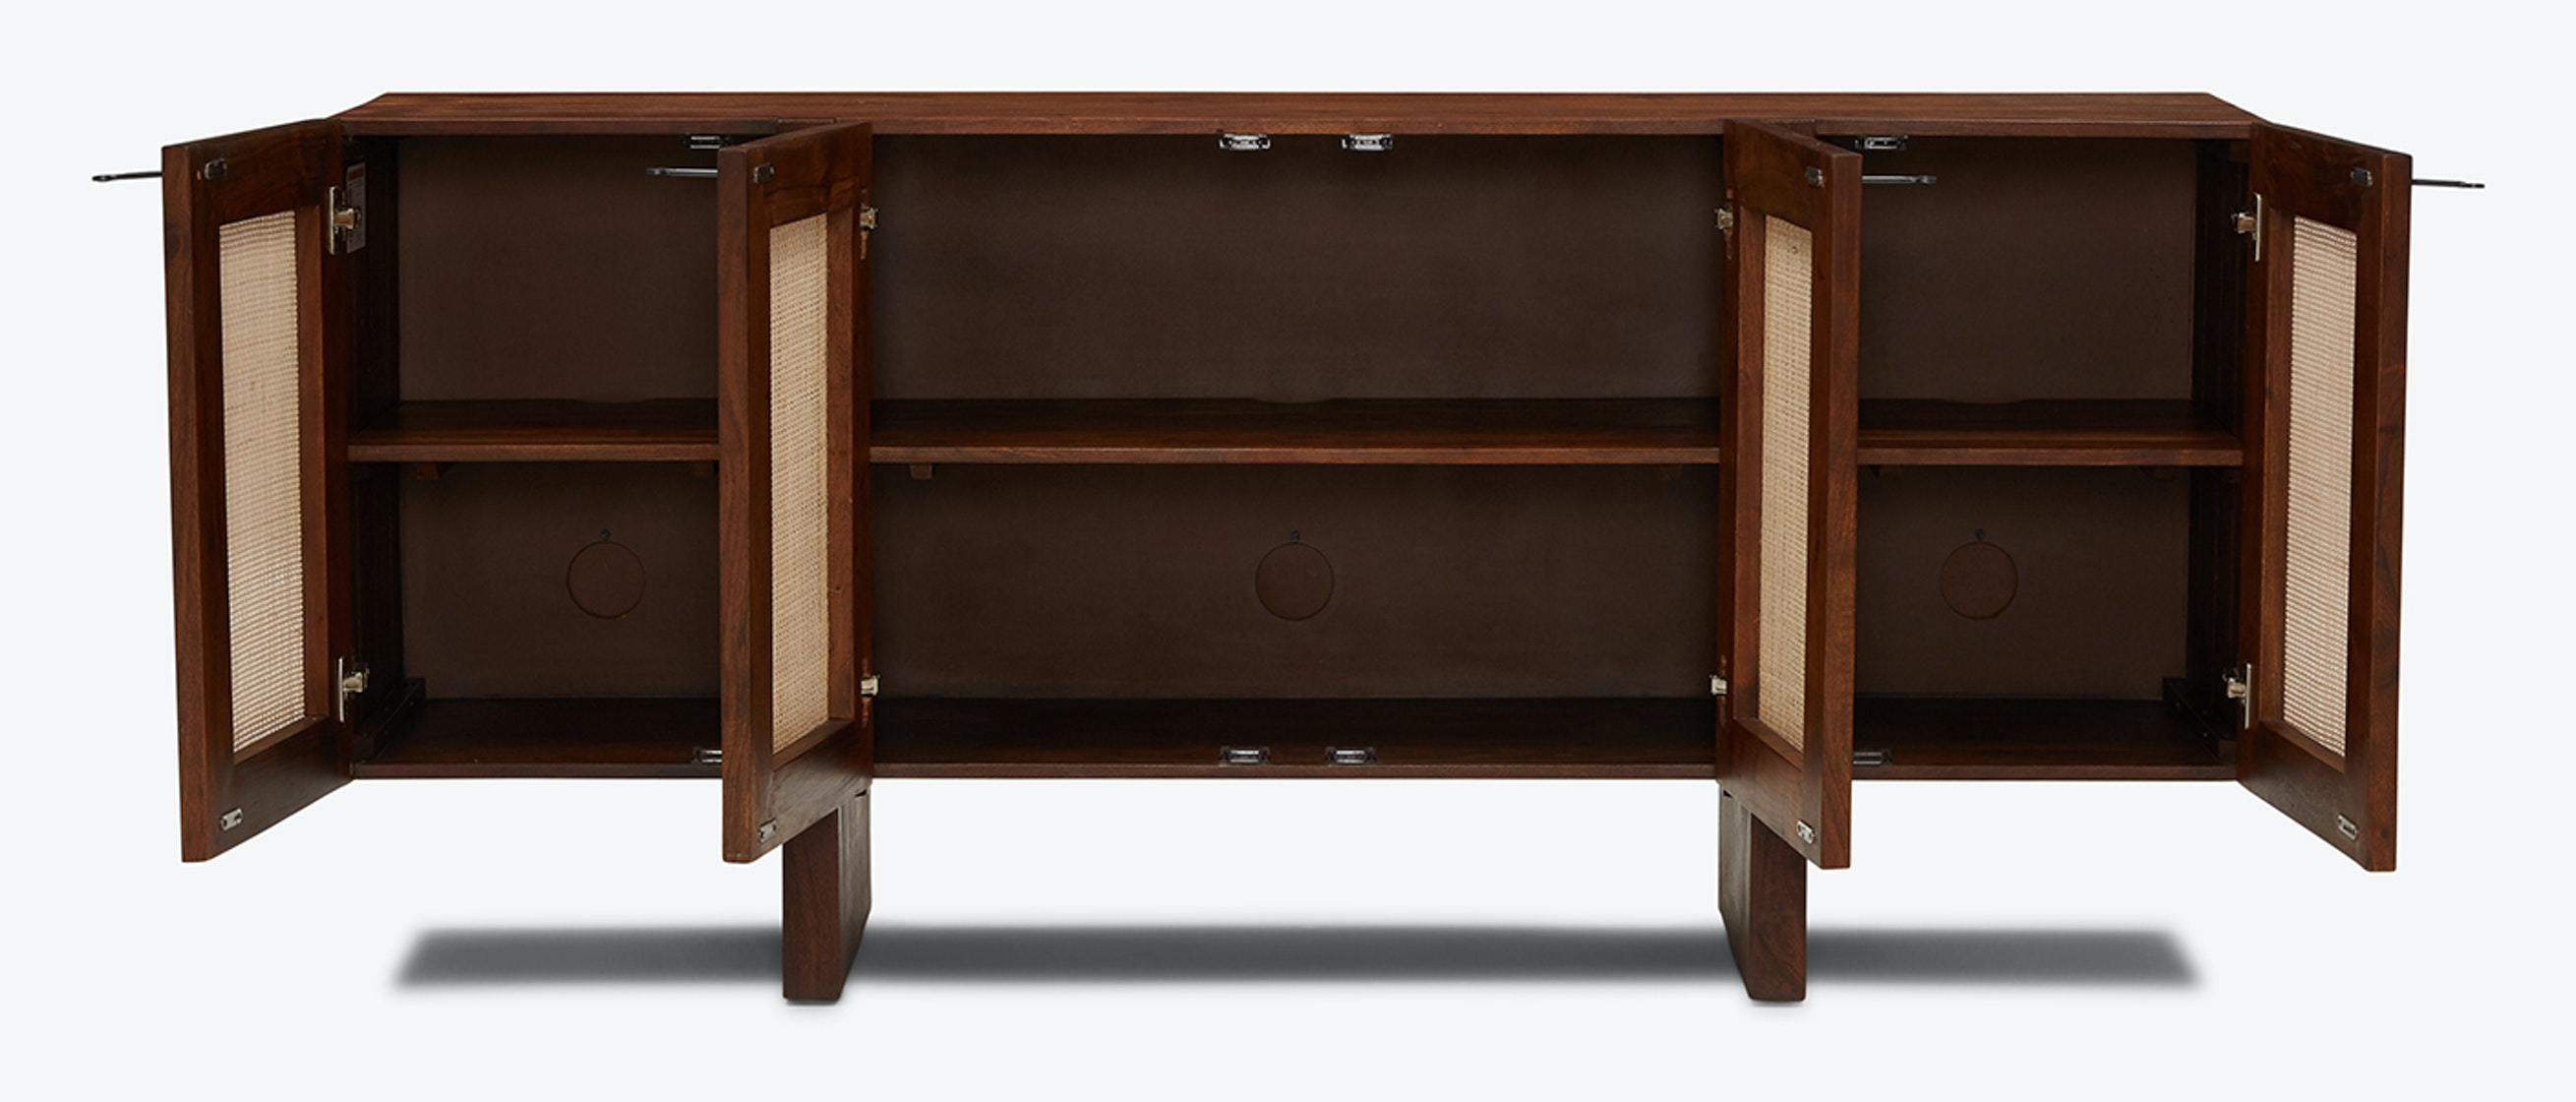 Frederick Console Cabinet - Image 2